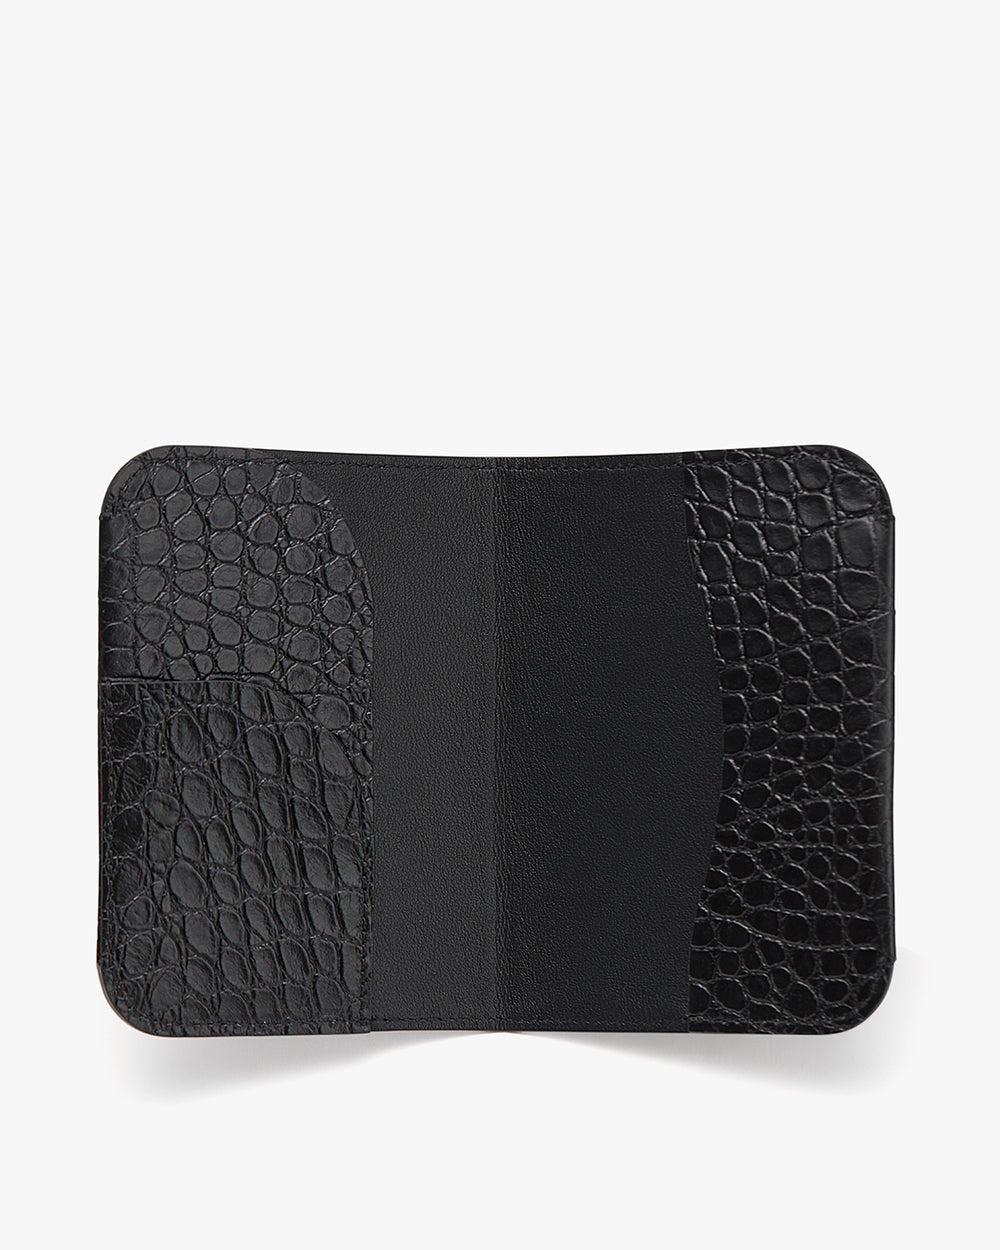 Wallet with textured and smooth sections